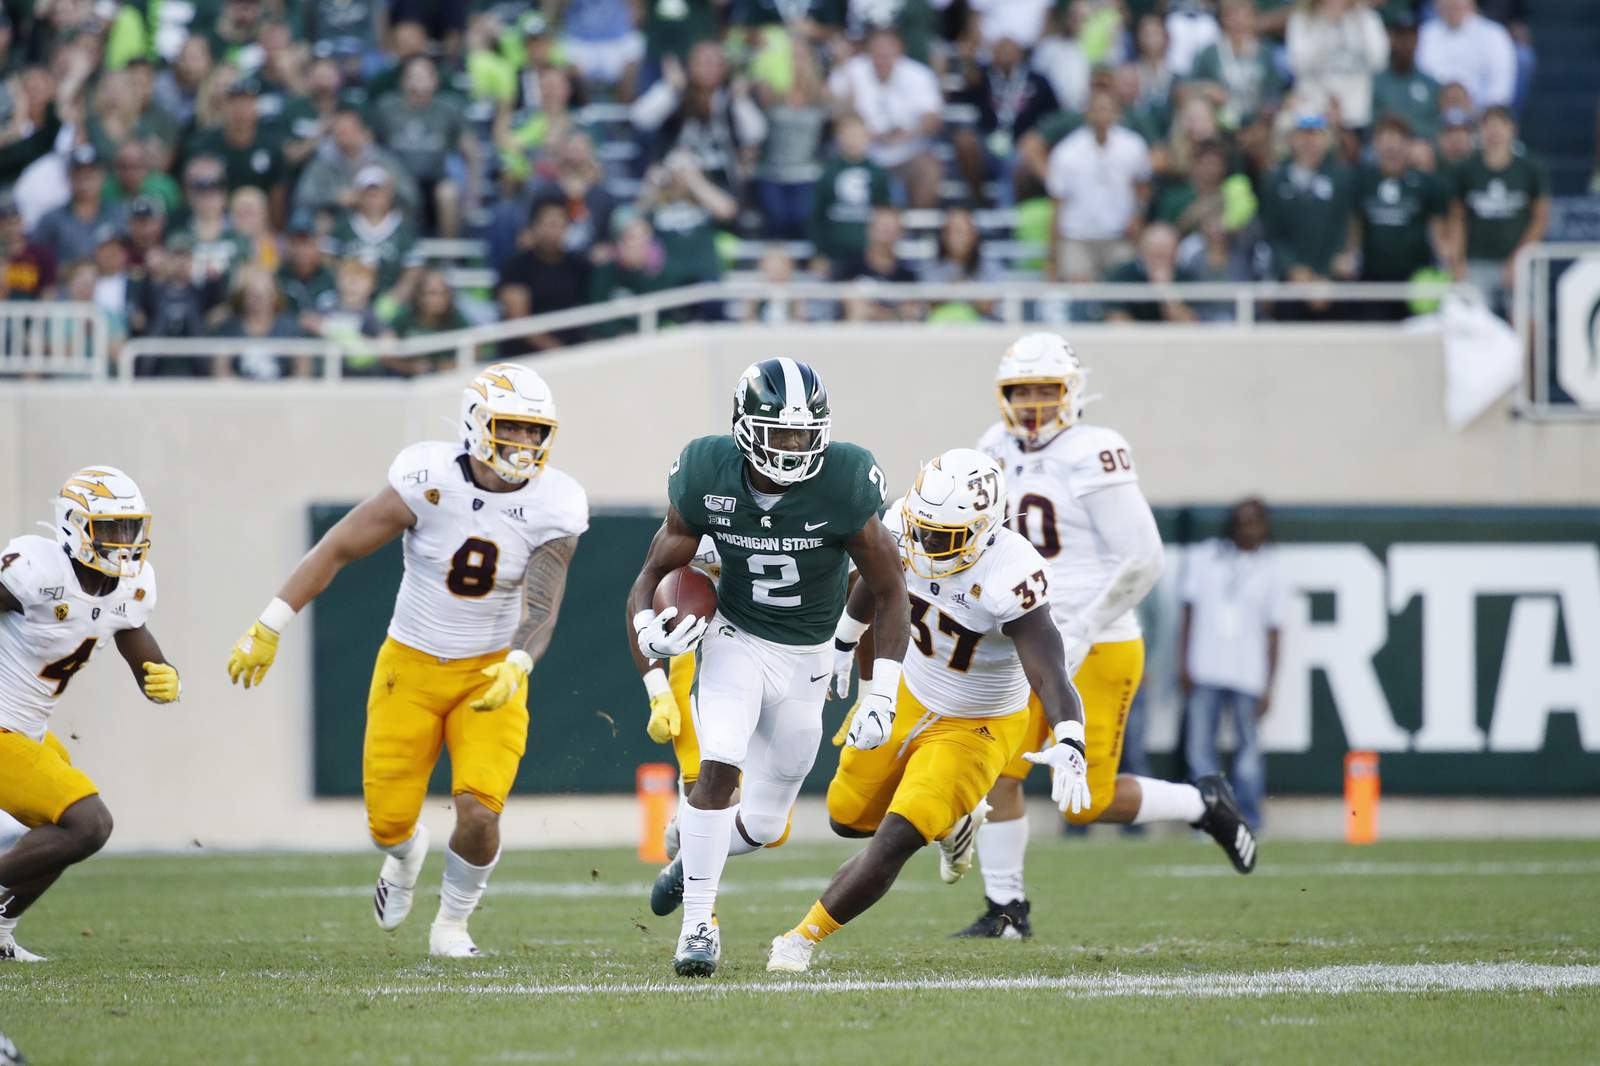 Here’s the new 8-game Michigan State football schedule for delayed 2020 season